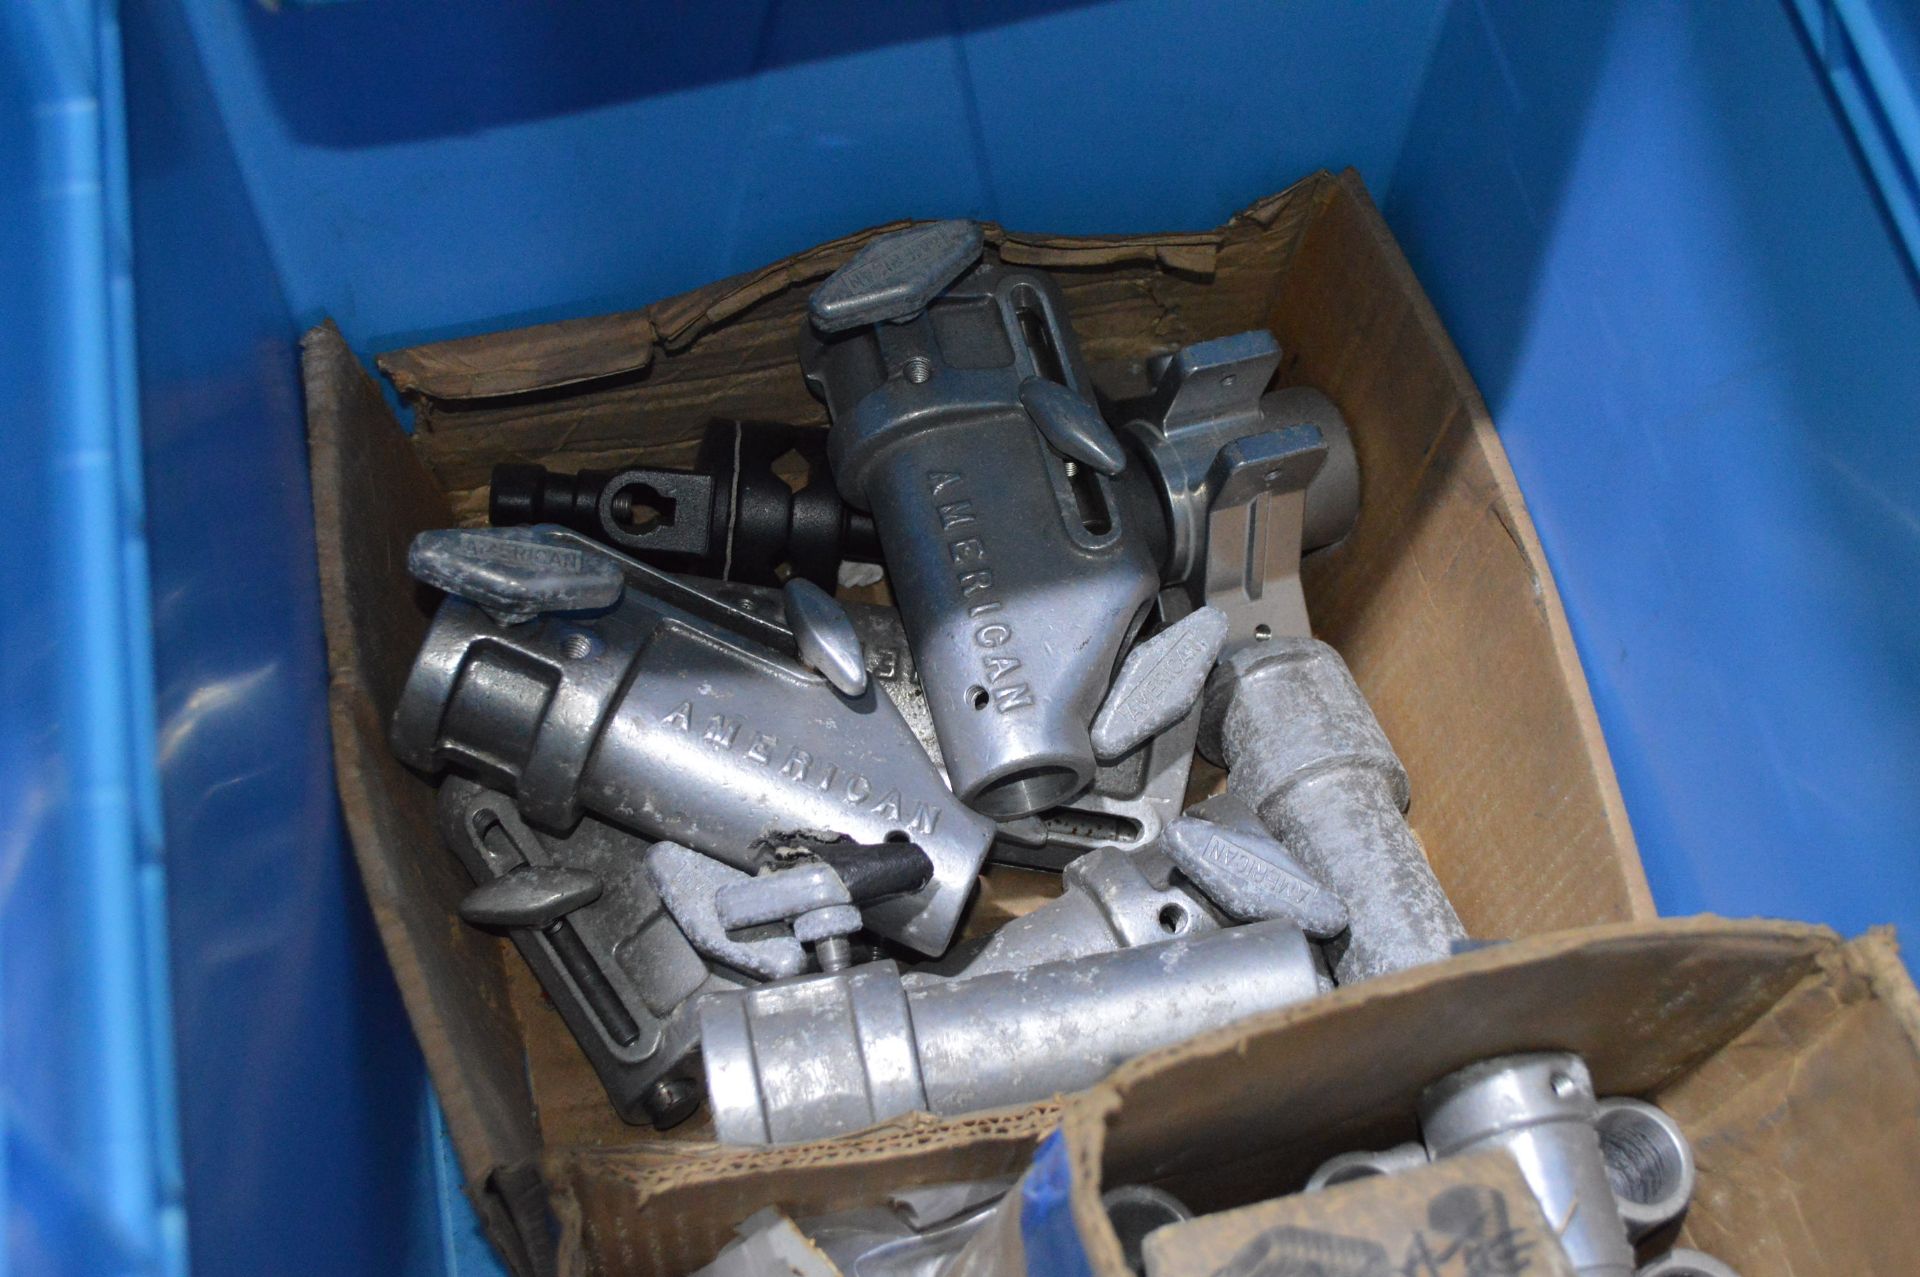 JOB LOT OF VARIOUS ITEMS, INCLUDING STOVE EQUIPMENT, BEE HIVE SMOKERS & LIFE JACKETS ETC. - Image 3 of 14